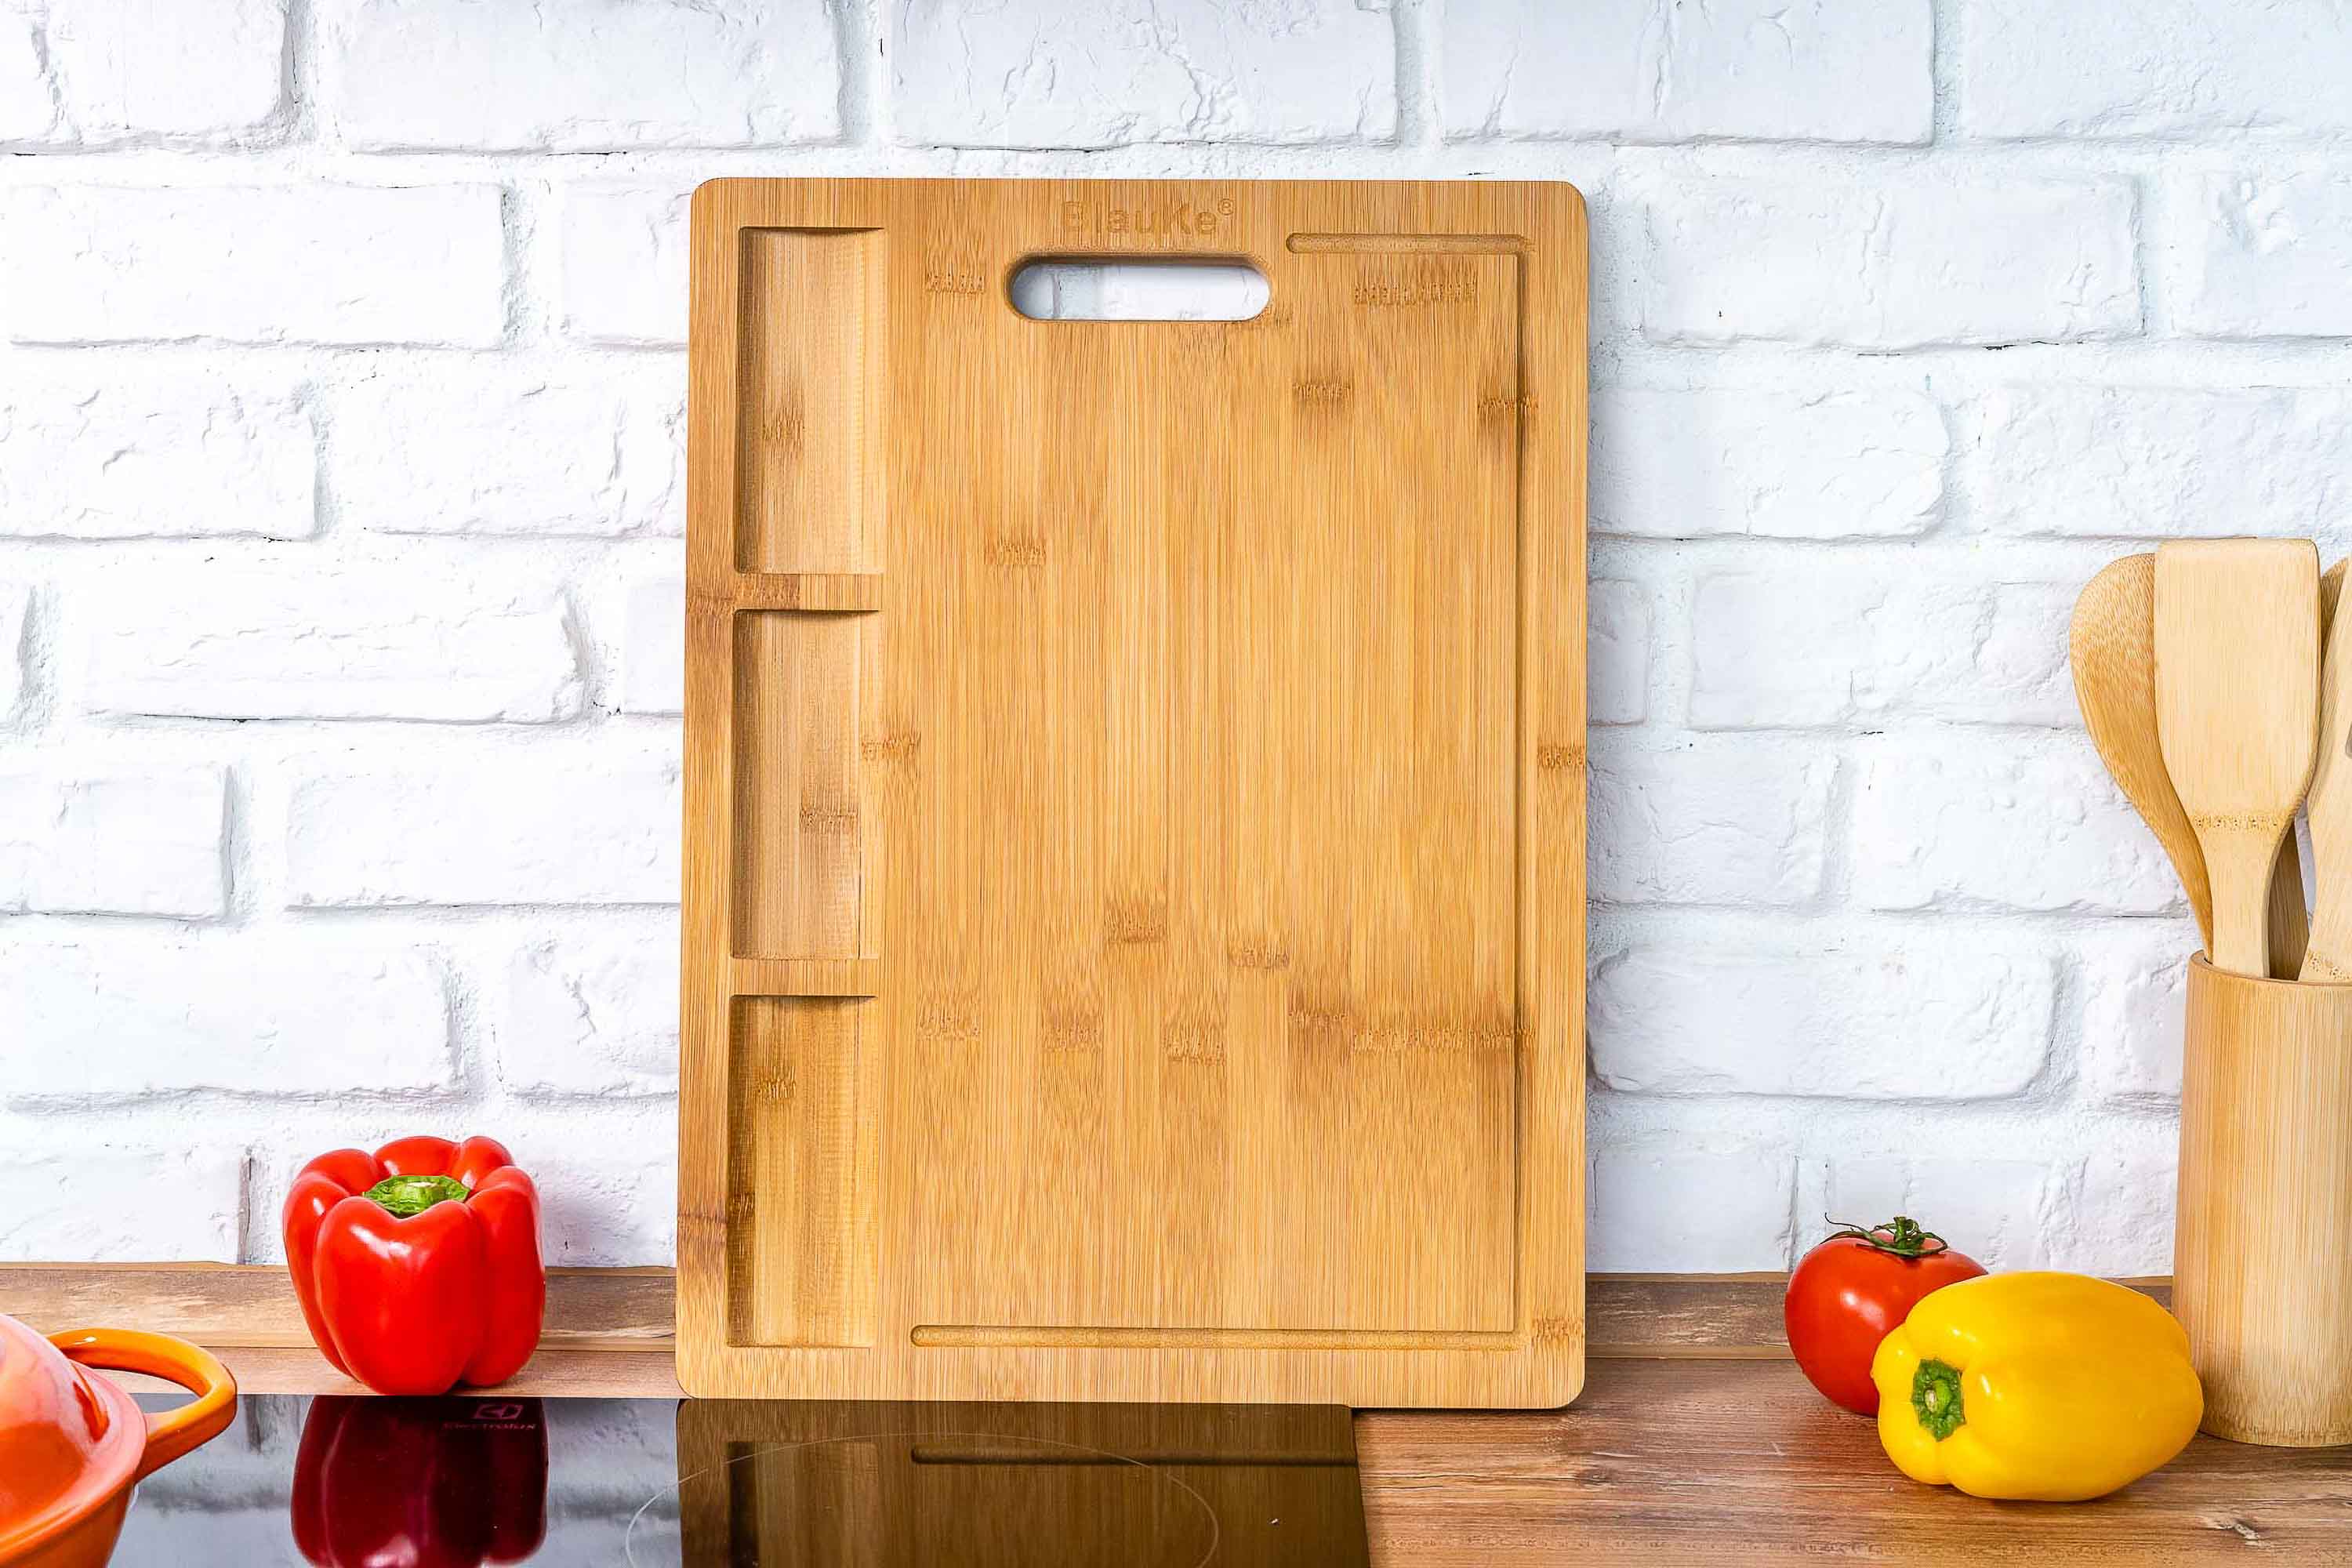 Extra Large Bamboo Cutting Board - 17x12.5 inch Wood Cutting Board for Meat, Cheese, Veggies - Wood Serving Tray with Juice Groove and 3 Compartments